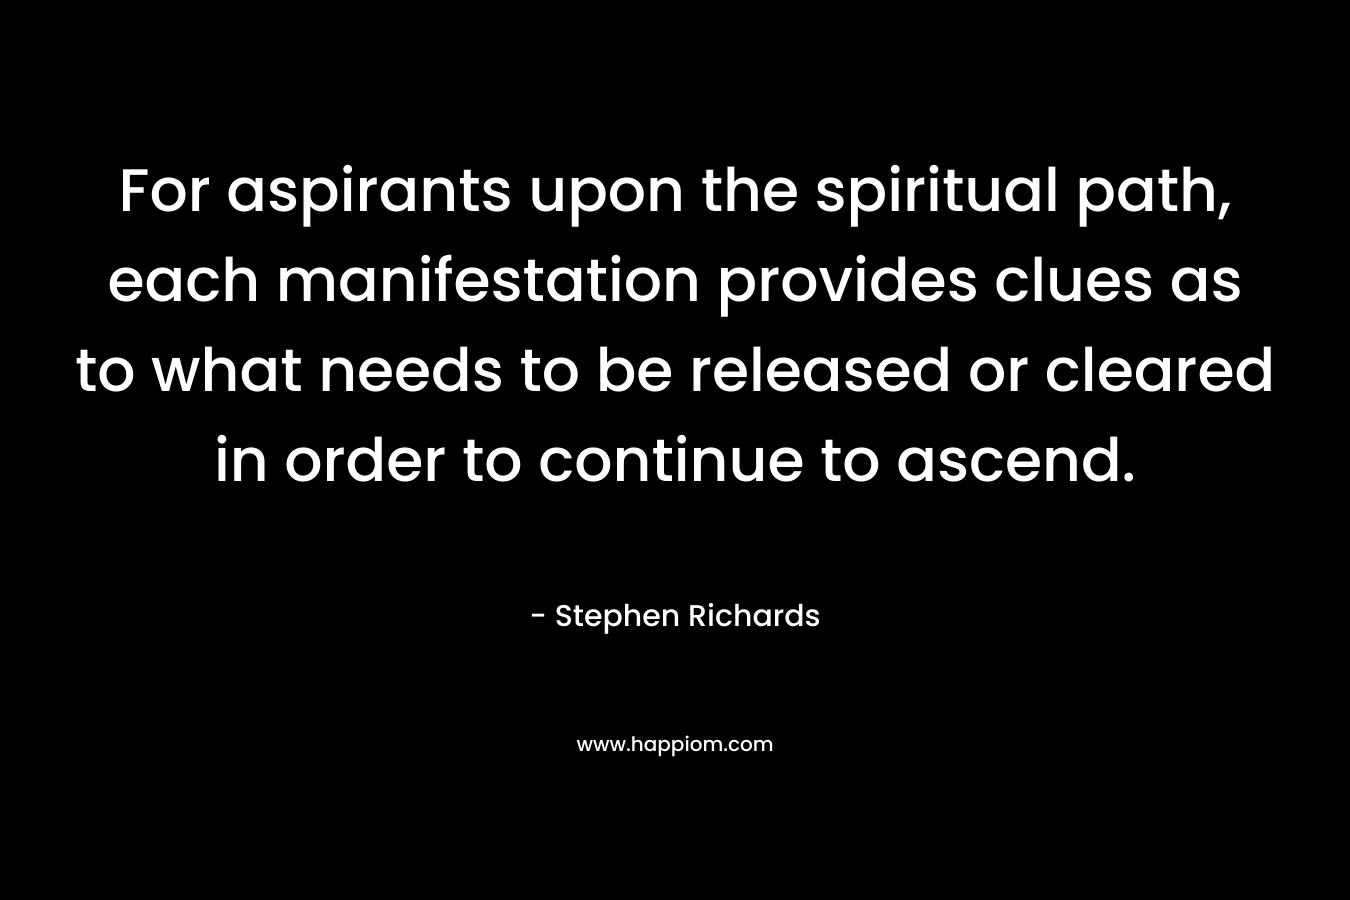 For aspirants upon the spiritual path, each manifestation provides clues as to what needs to be released or cleared in order to continue to ascend. – Stephen Richards